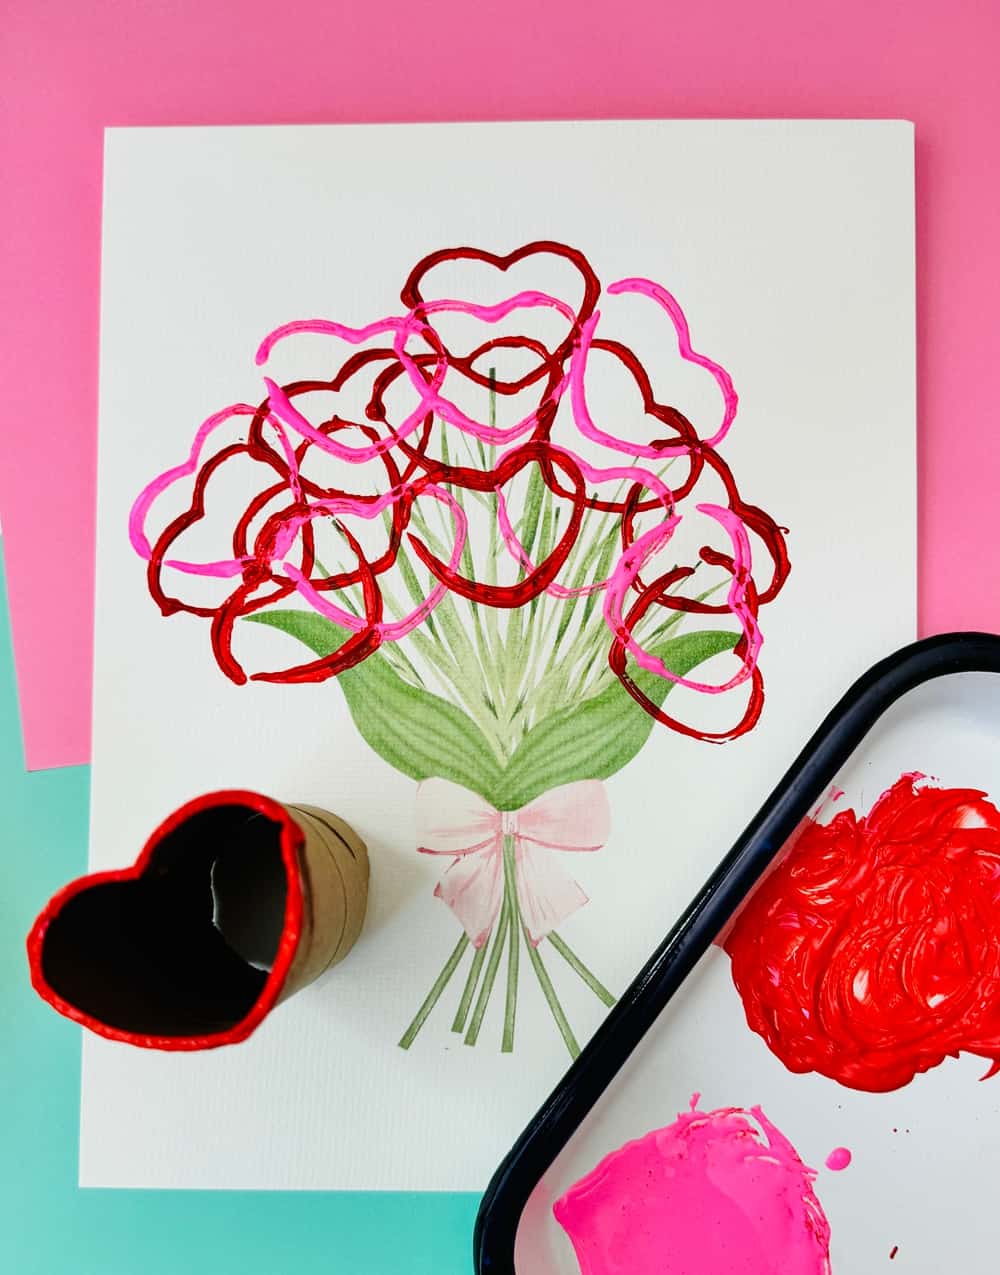 Easy DIY Toilet Paper Roll Heart Stamps for Kids - The Craft-at-Home Family